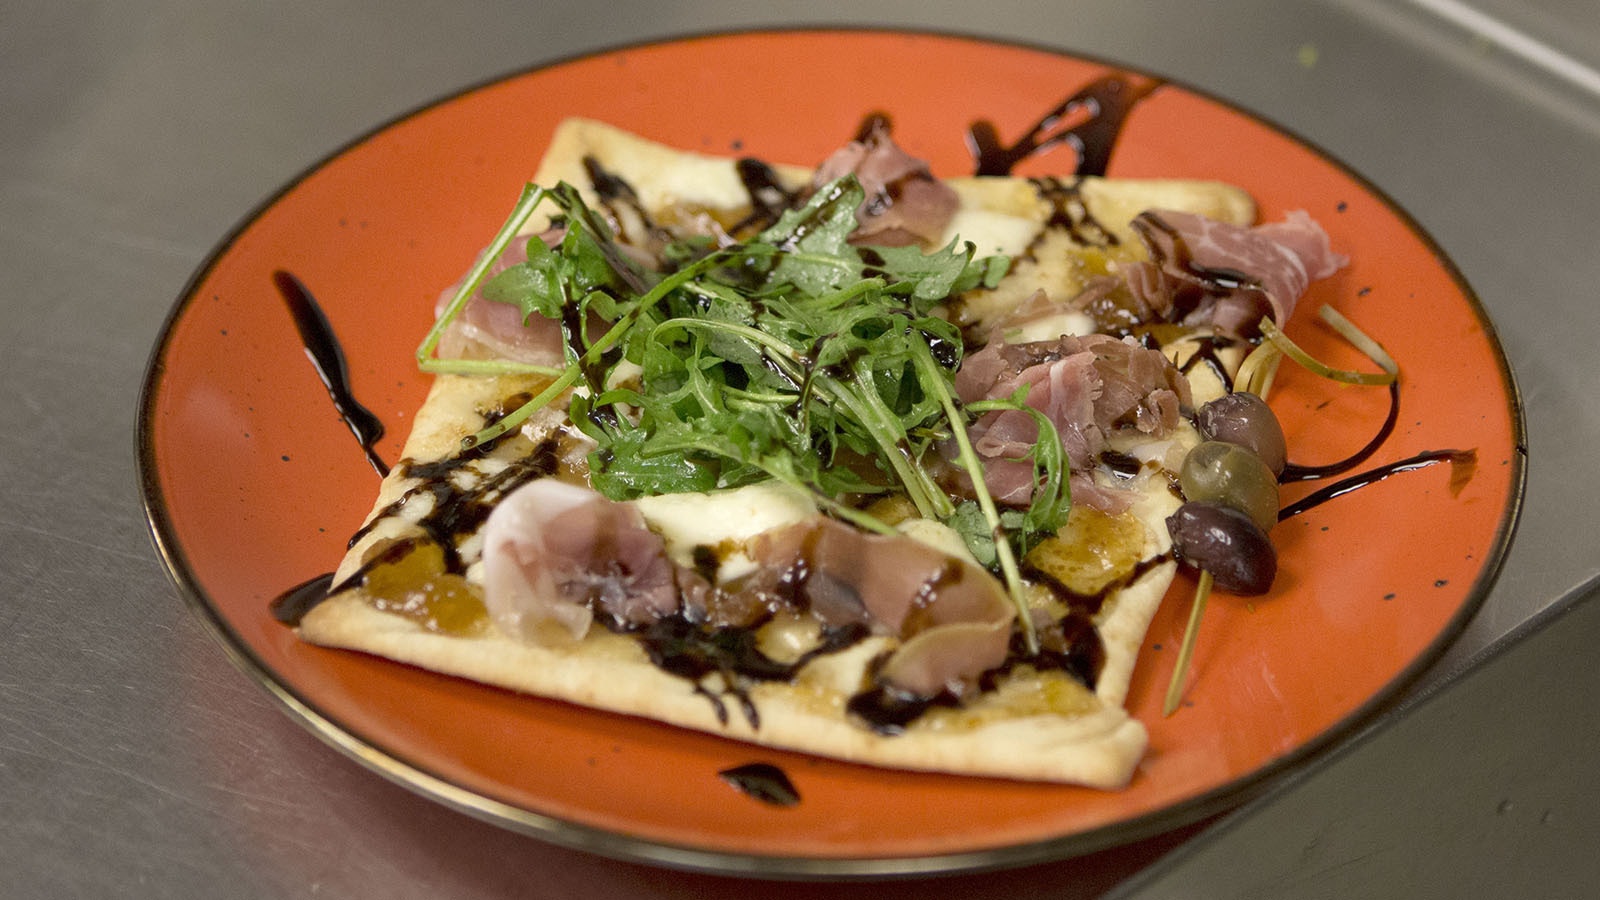 The flatbread with fig and prosciutto is one of Parders many delicious specials.